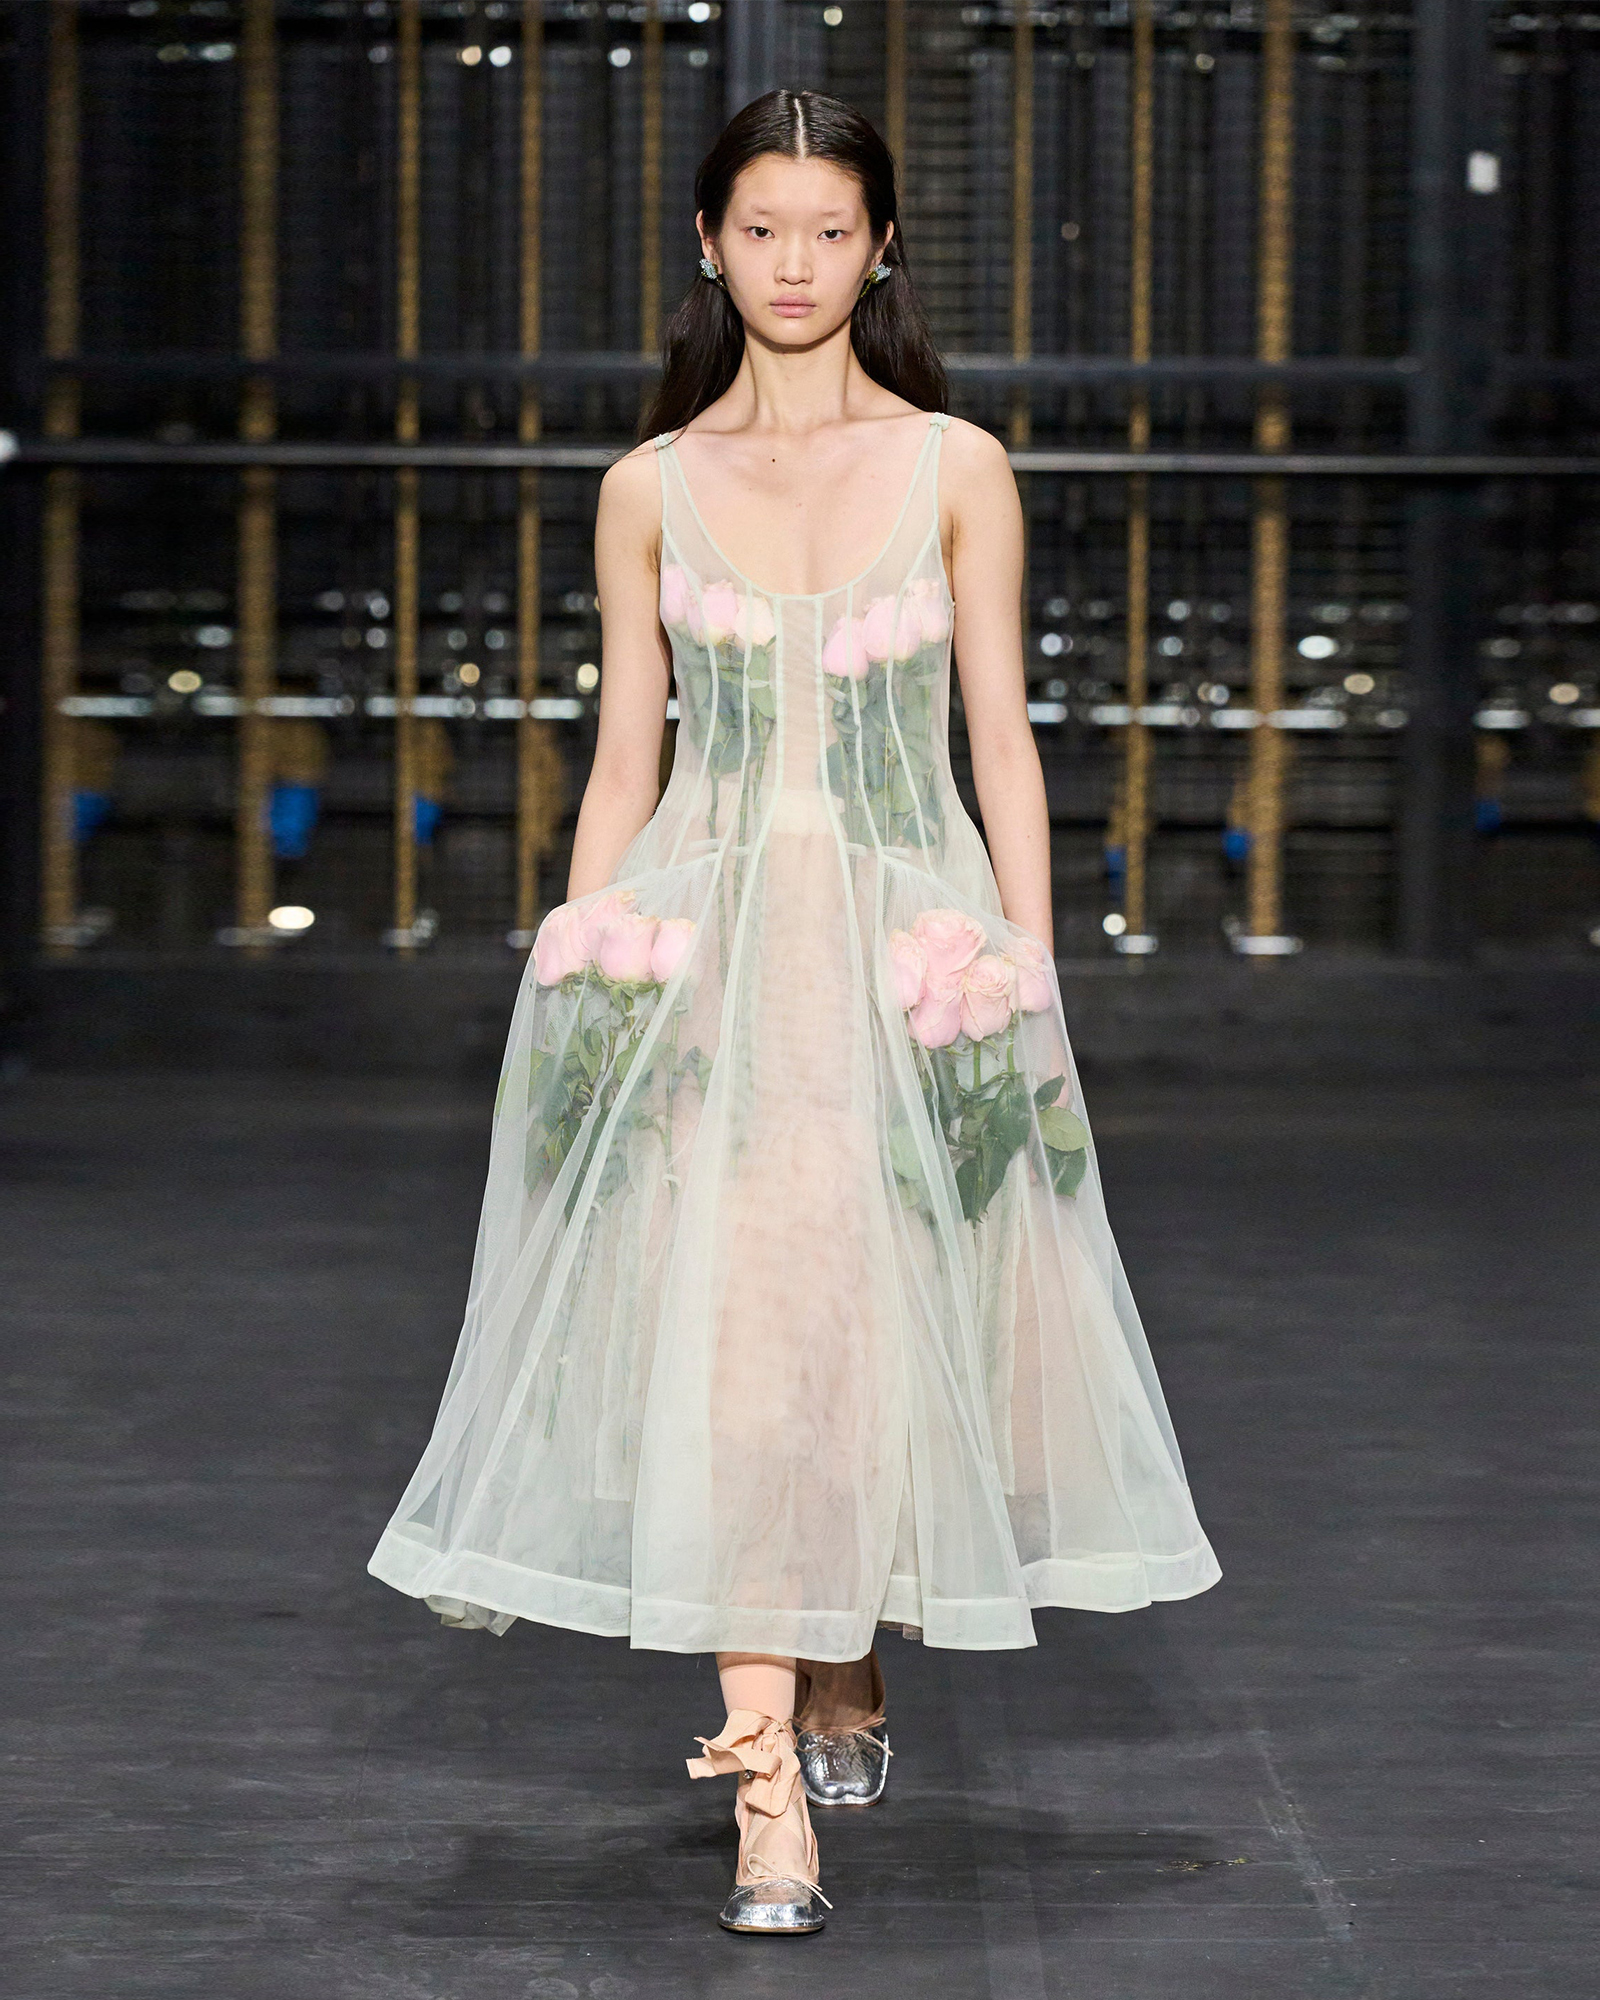 White dress with roses by Simone Rocha. White floral dress.